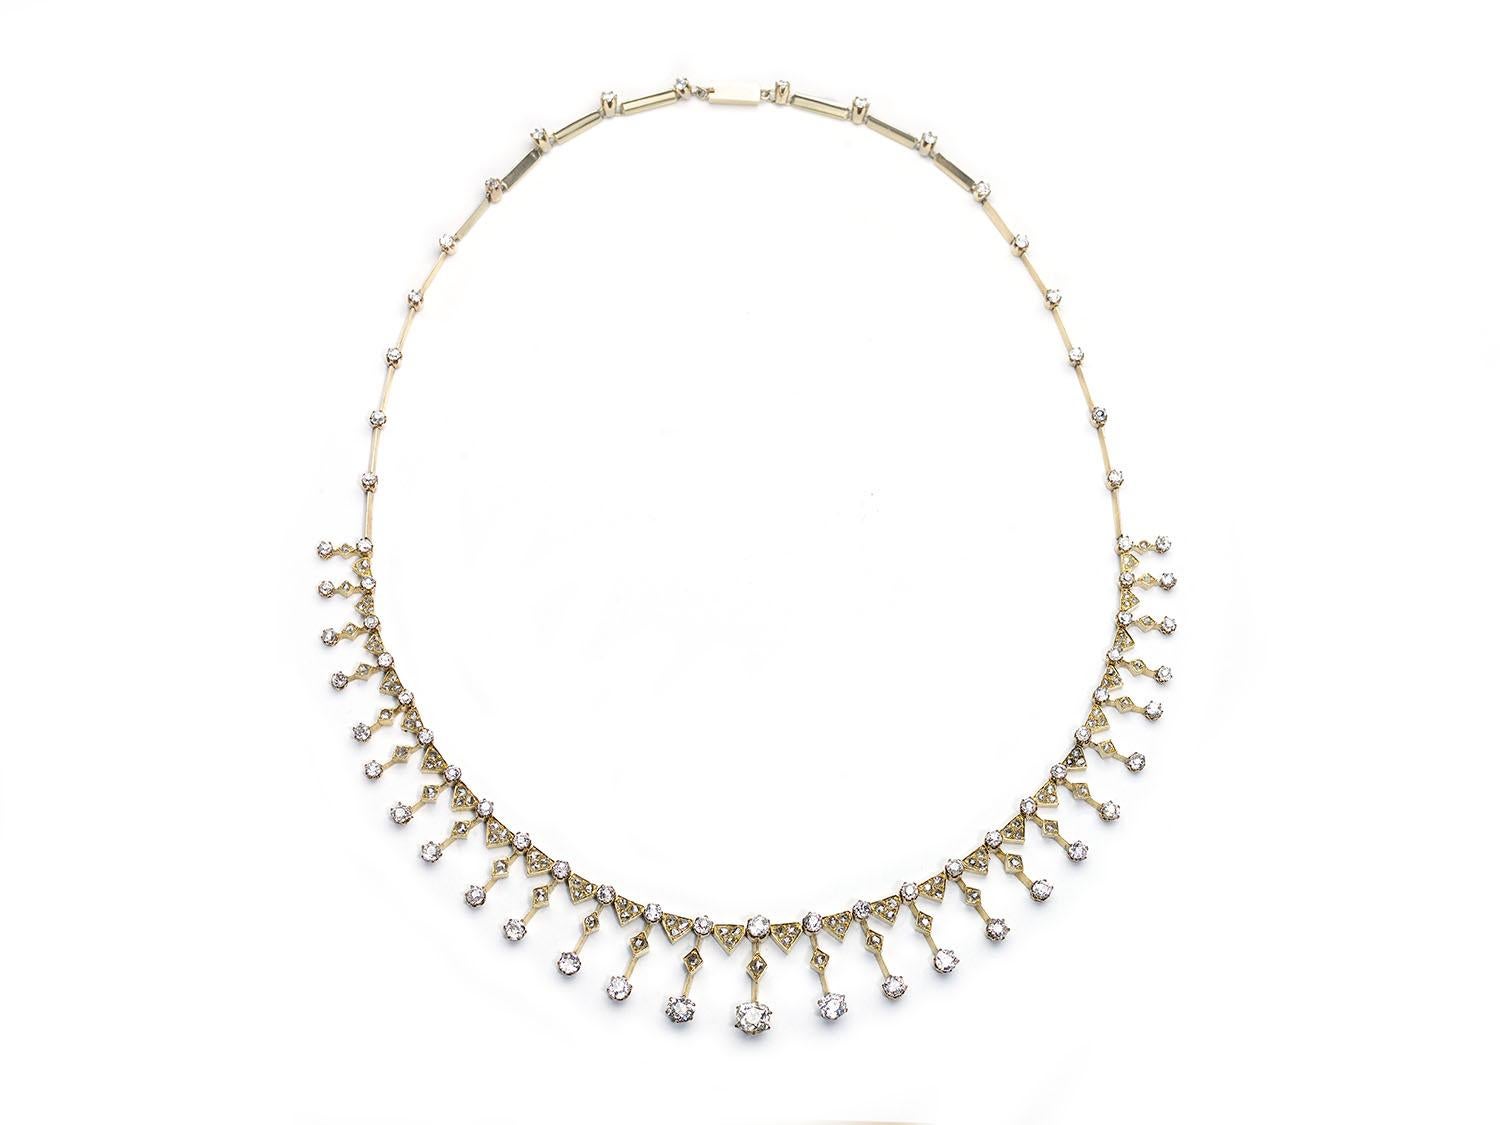 Old Mine Cut Antique Diamond Silver and Gold Fringe Tiara Necklace, Circa 1880